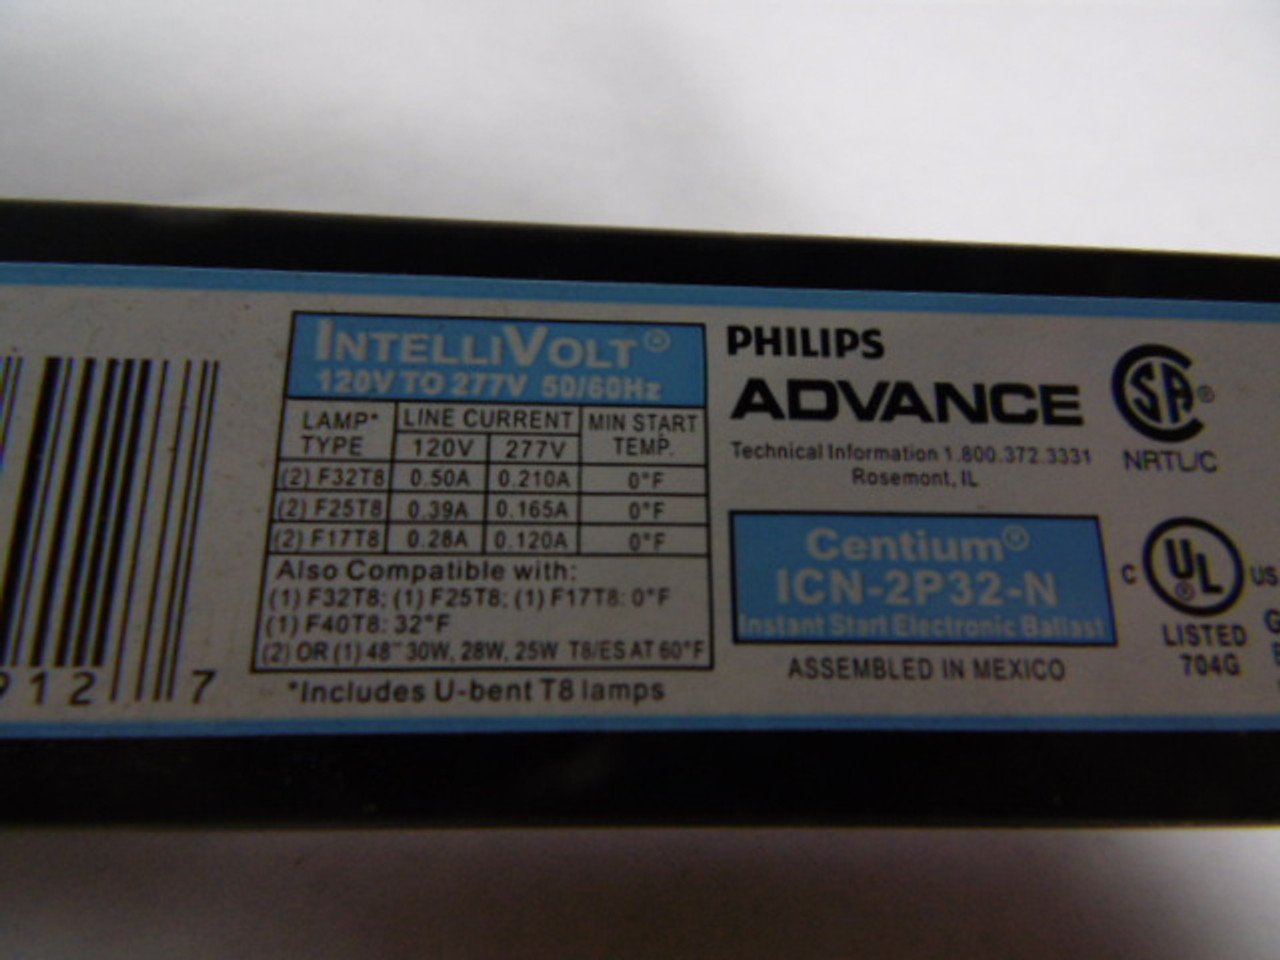 Philips ICN-2P32-N Instant Start Electric Ballast 120-277V 0.5-0.21 A 50/60 Hz USED